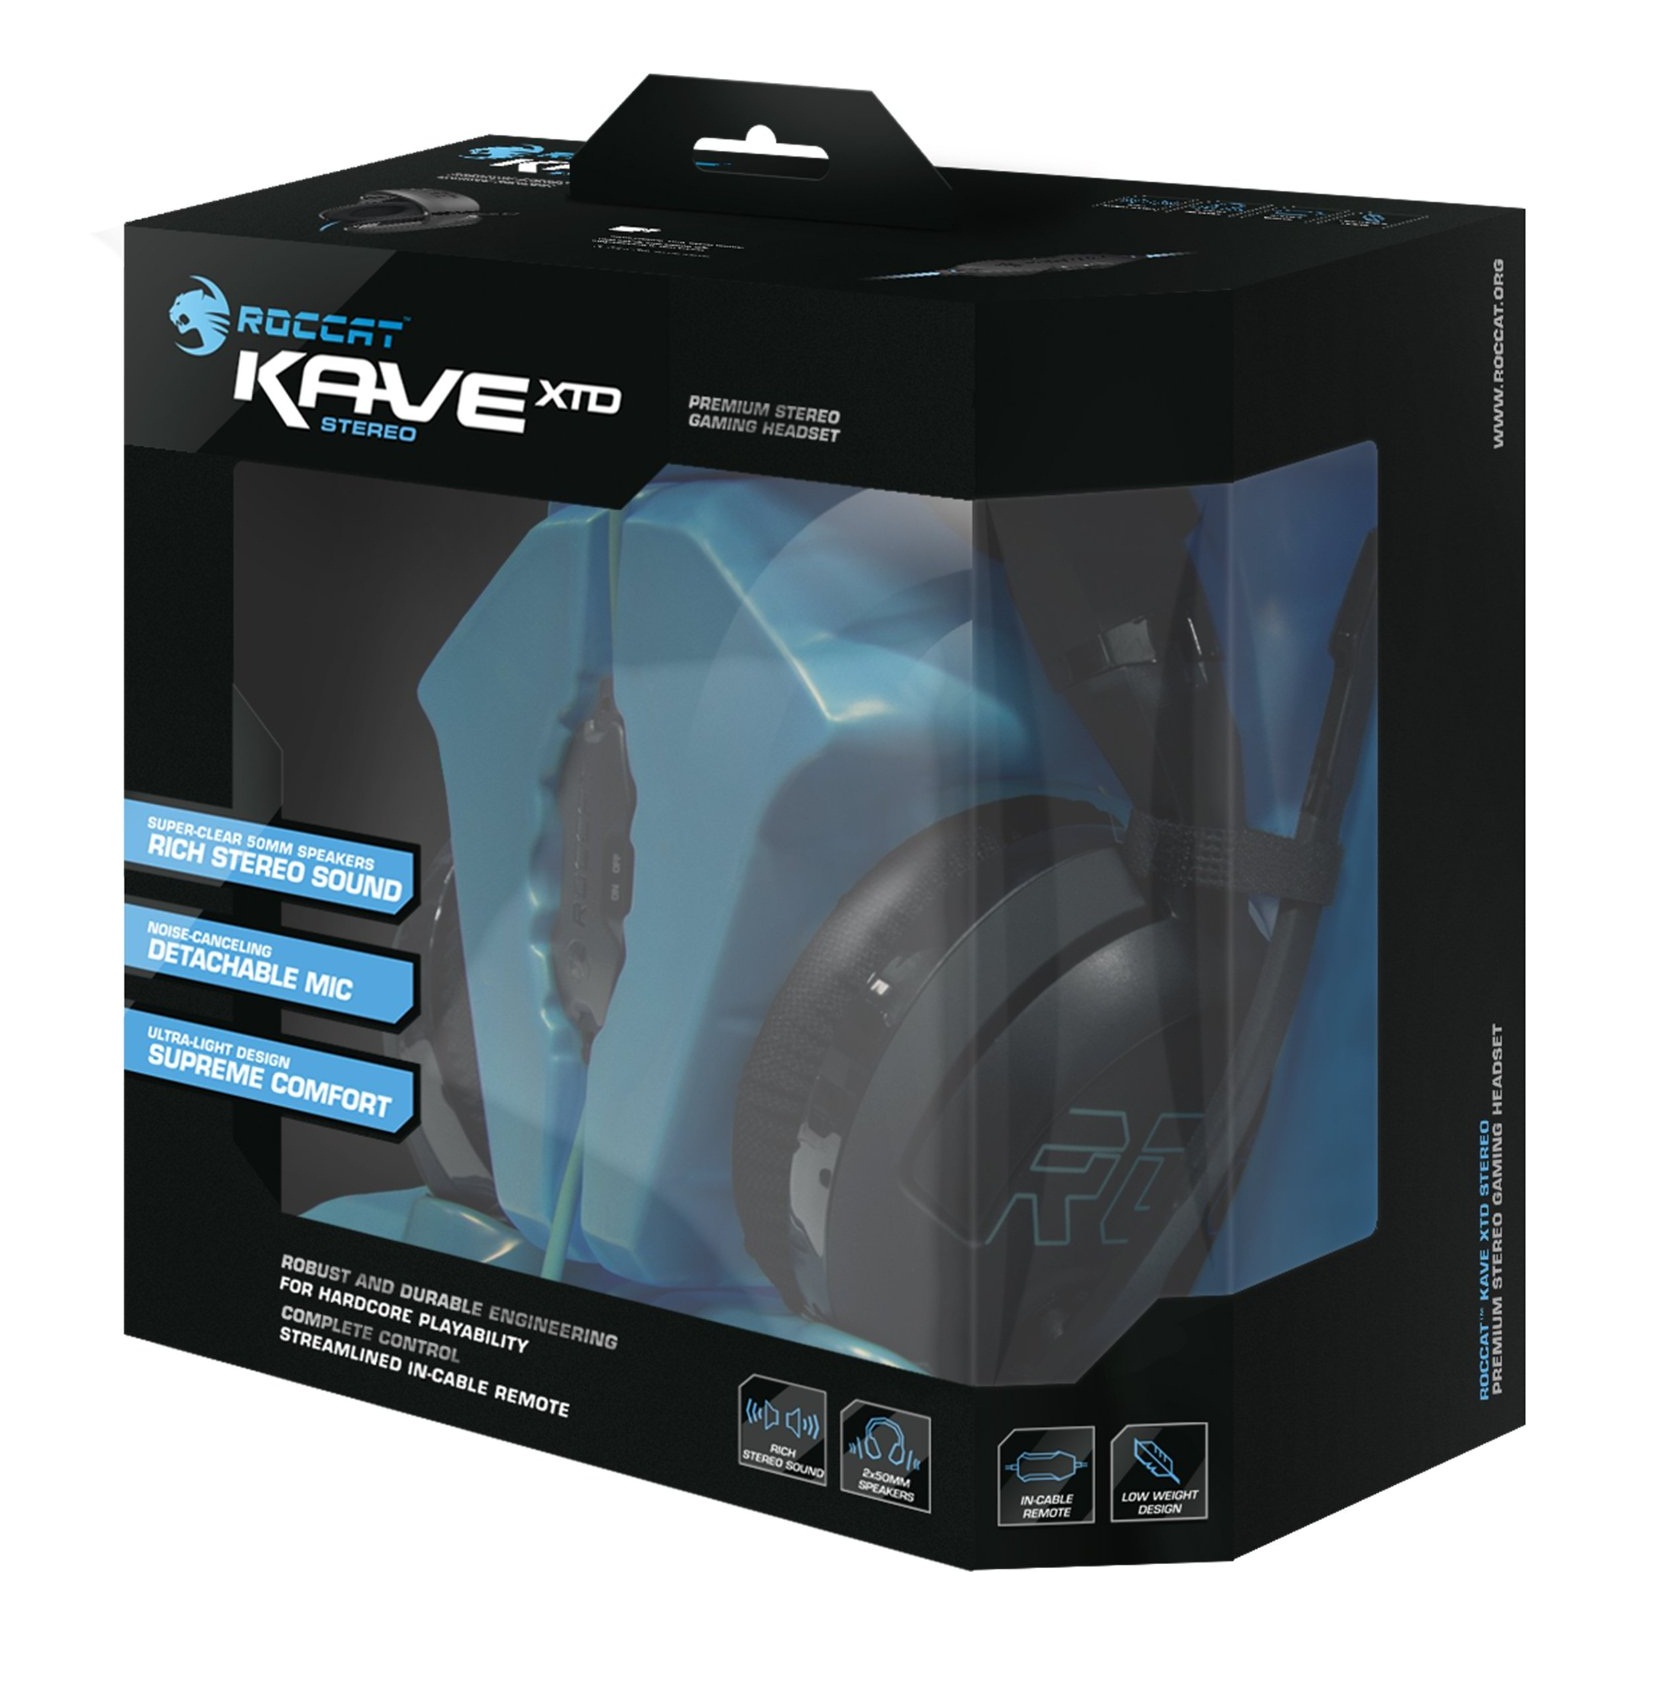 Tai nghe Roccat Kave XTD Stereo 2.0 (Đen)